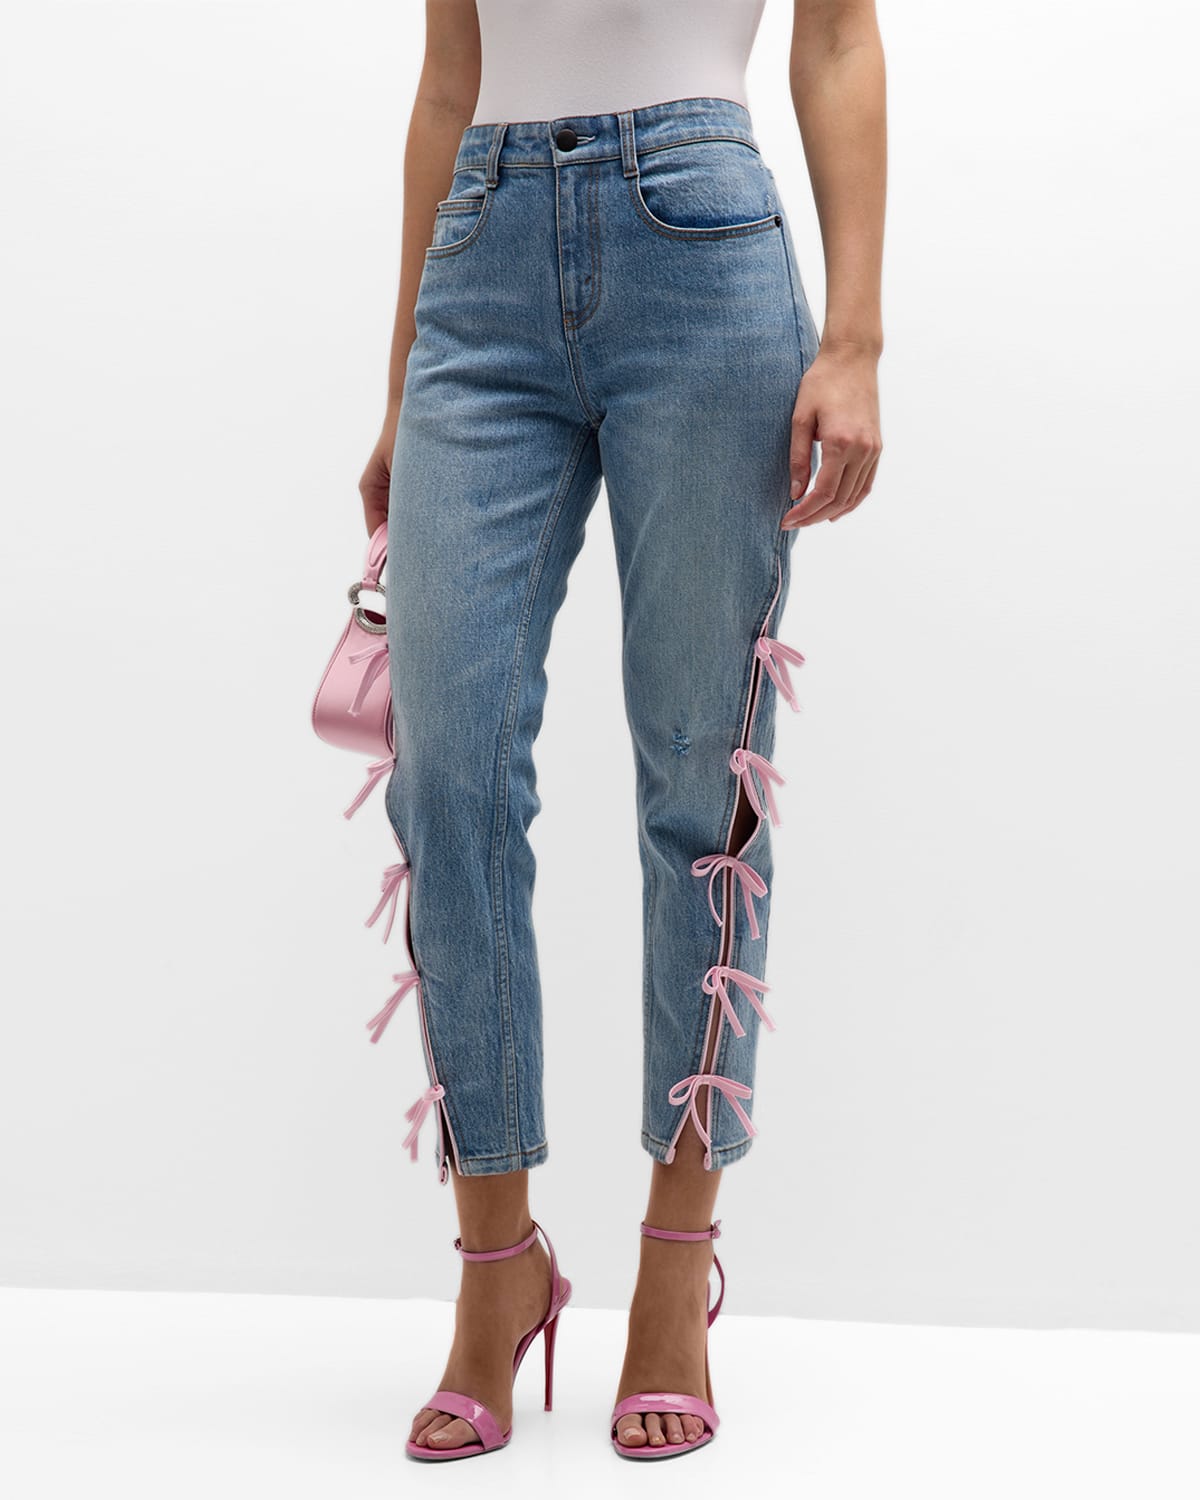 Hellessy Janelle Distressed Skinny Jeans With Ribbon Detail In Medium Wash